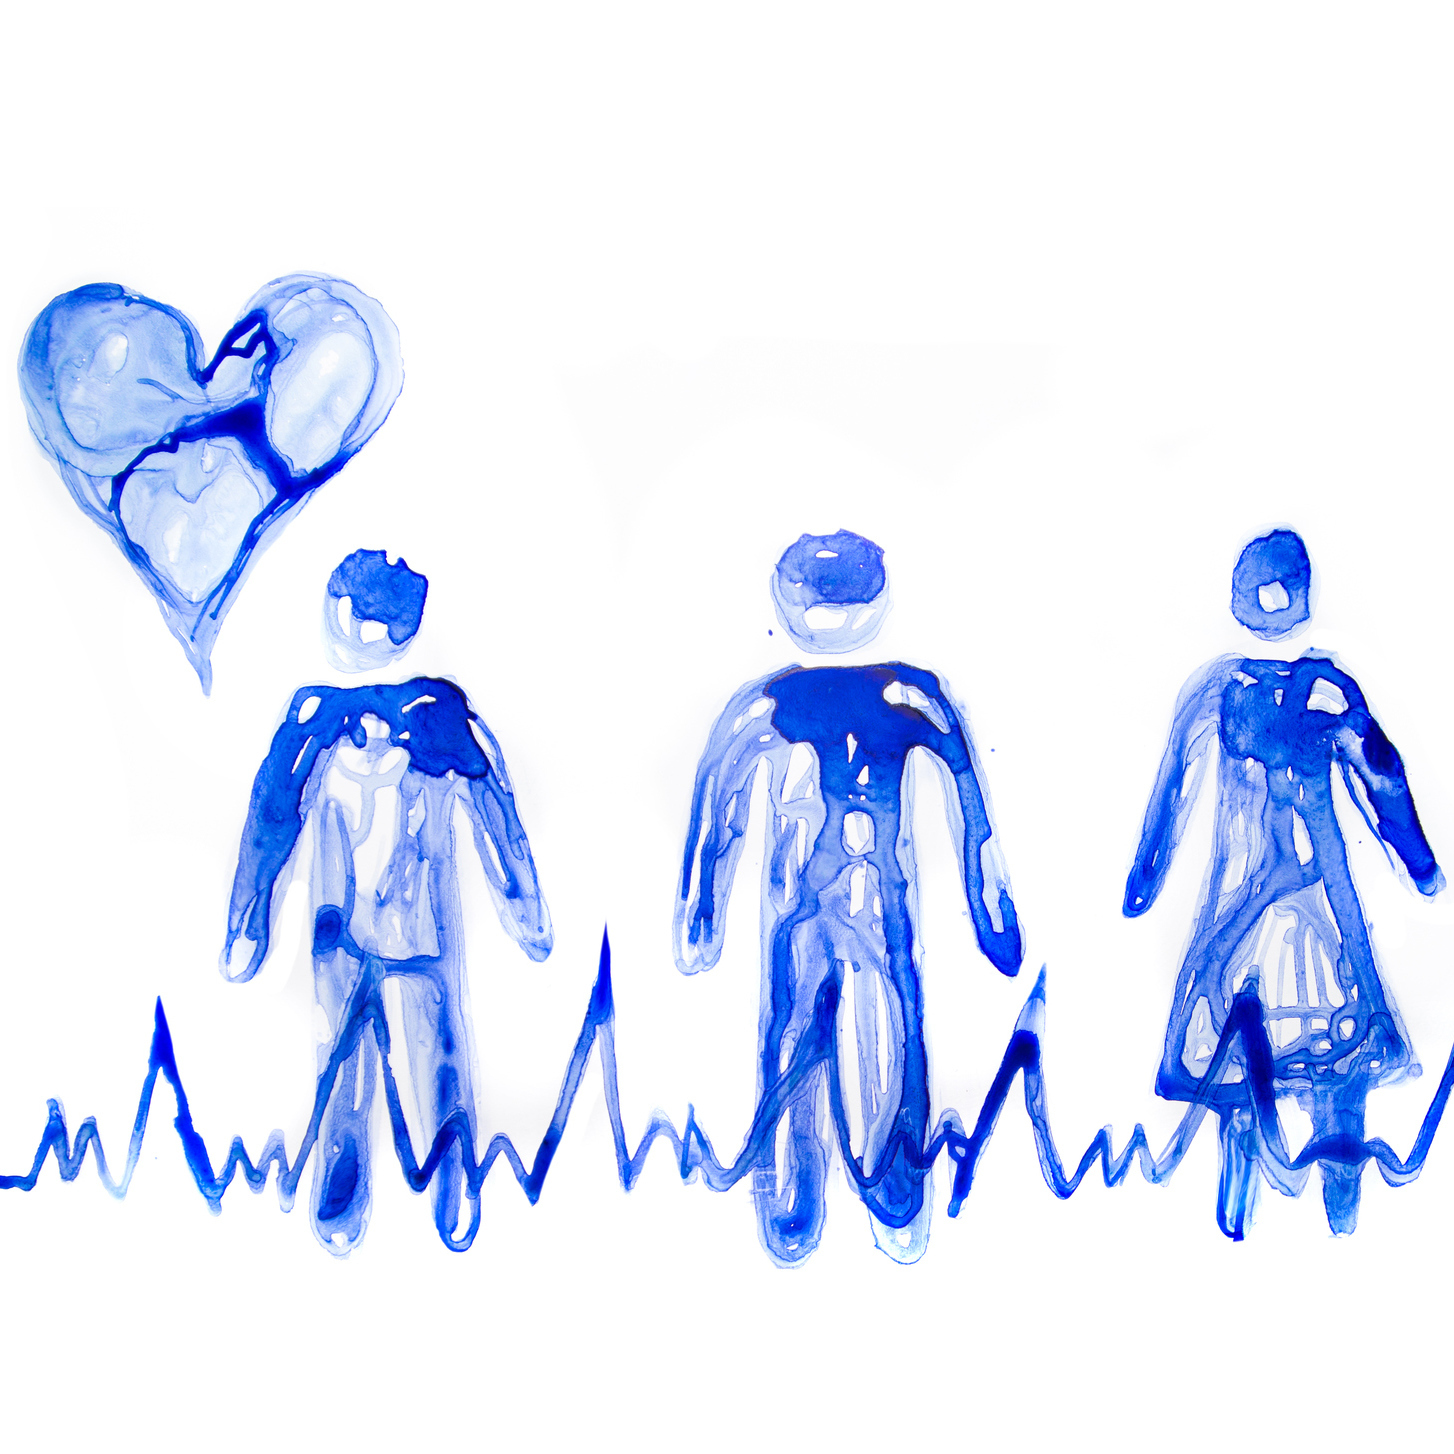 Water colored people, with a heart and heart moniter wave.